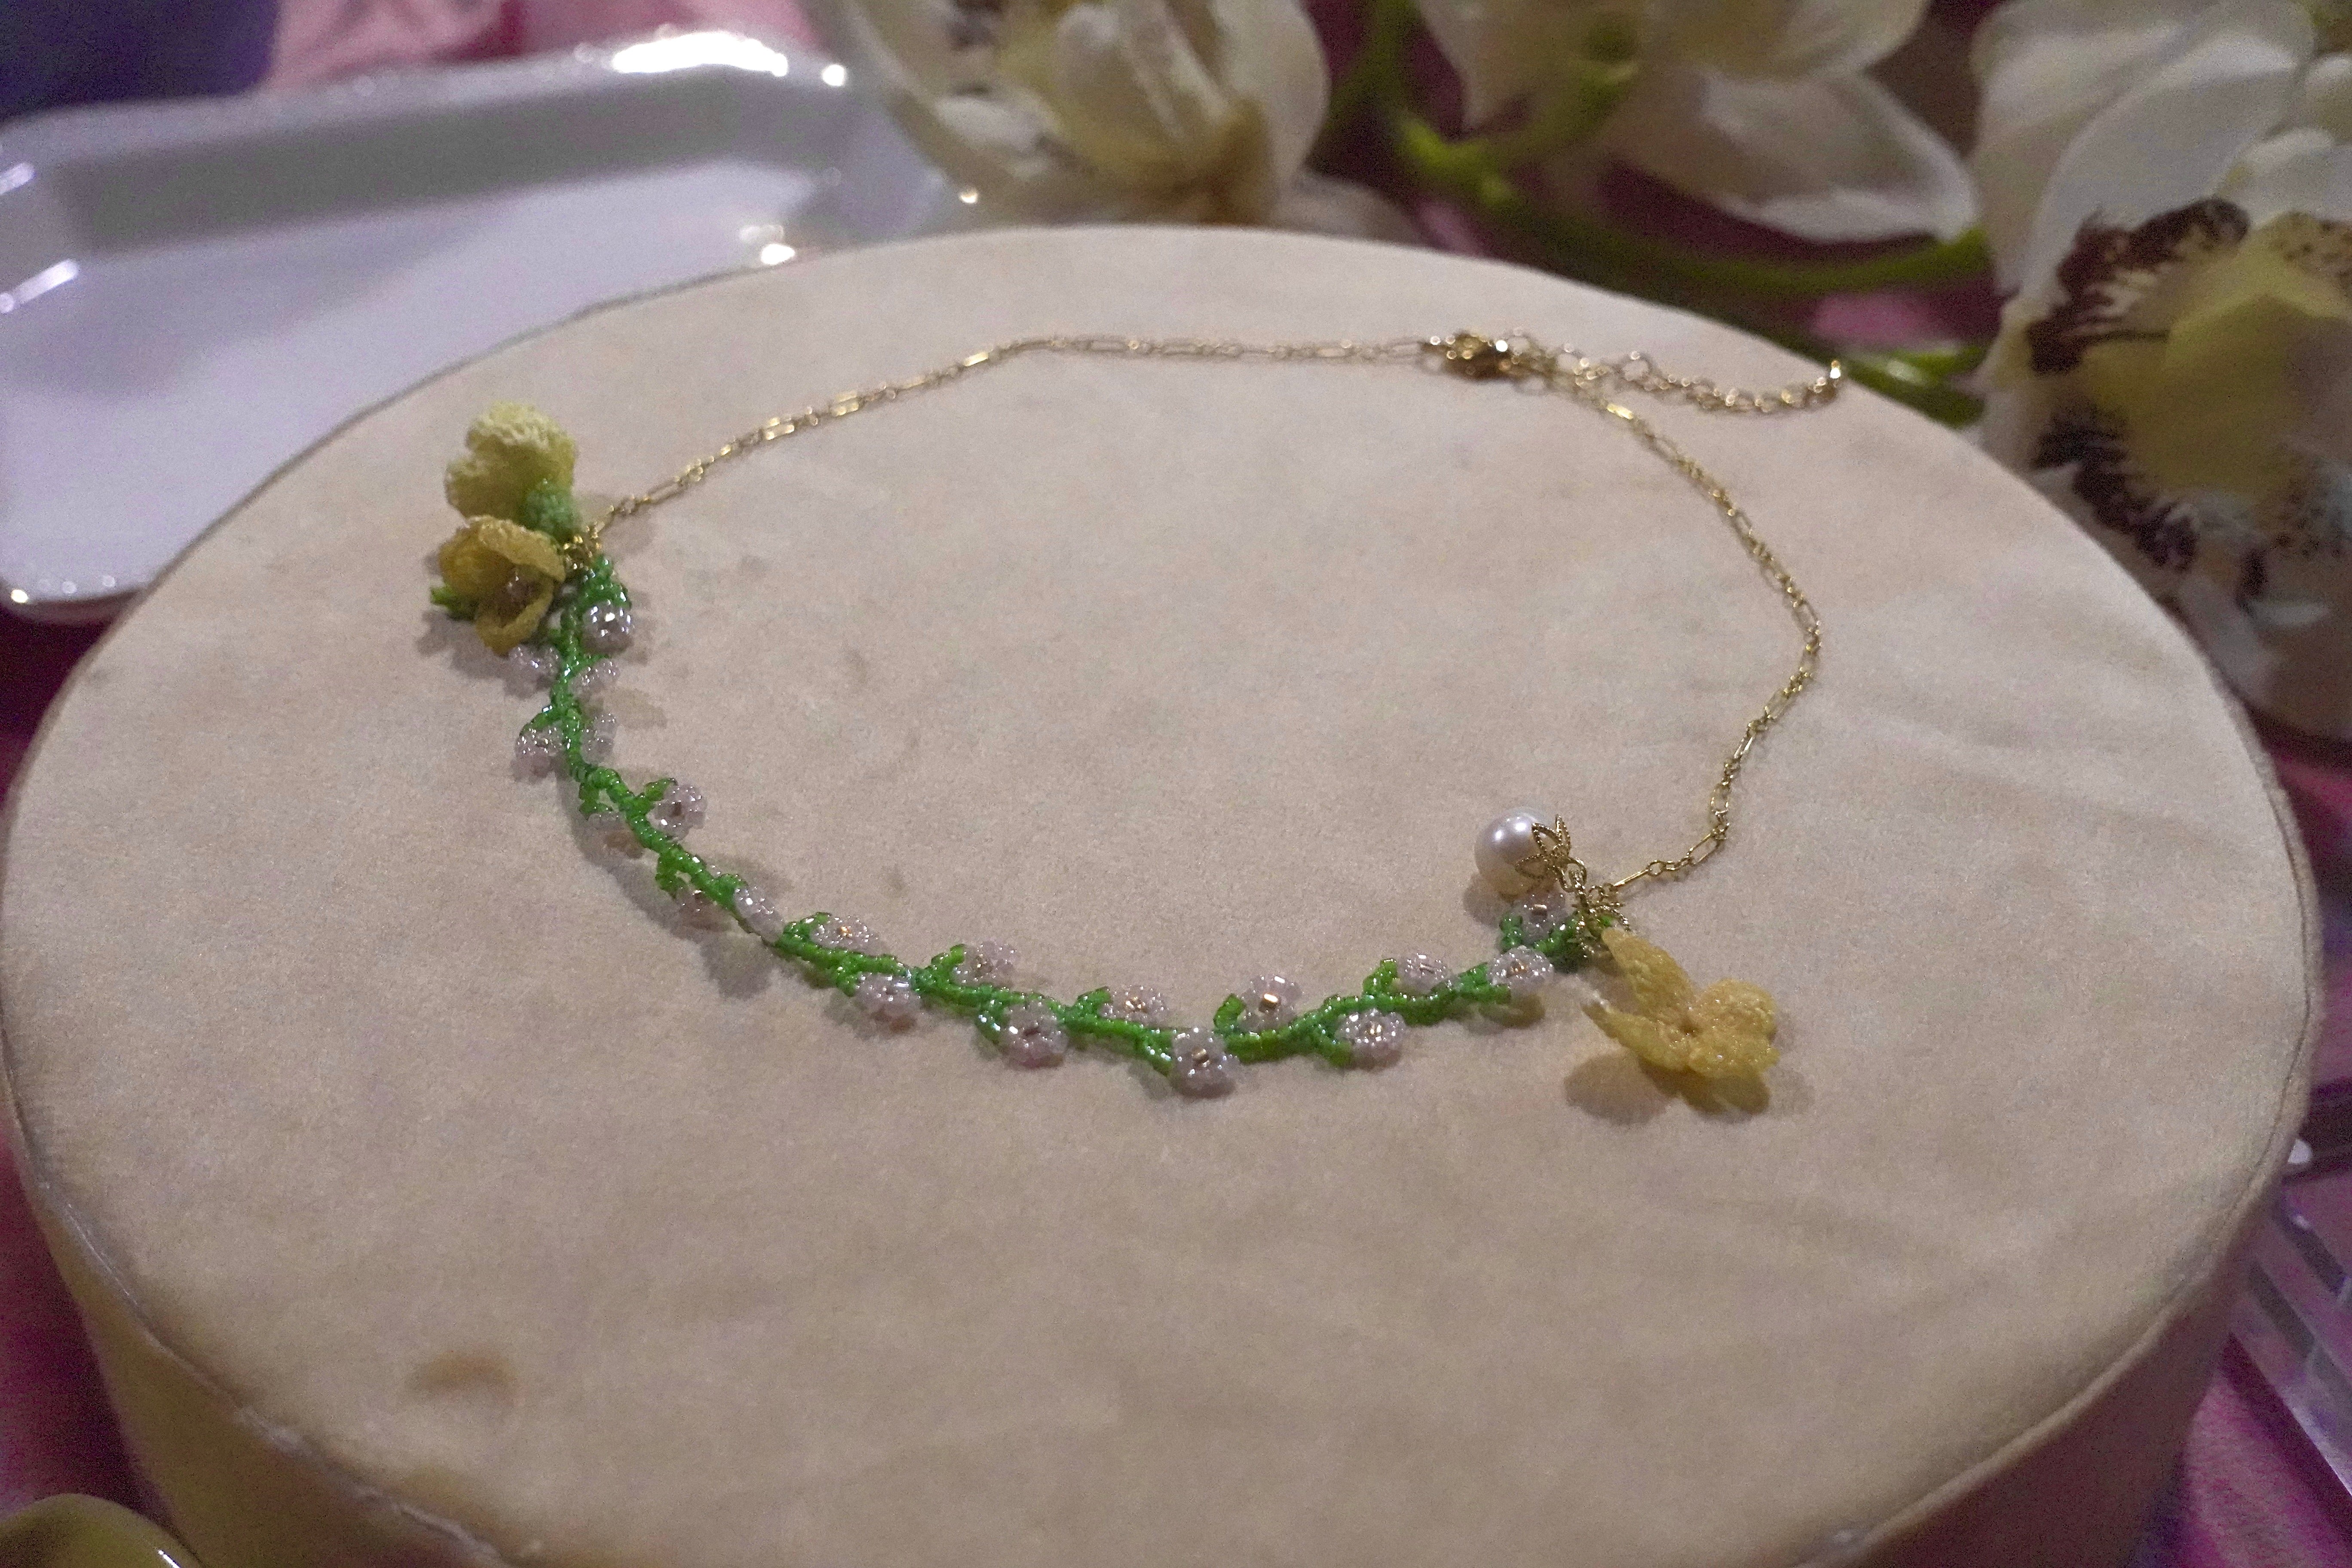 Crochet Flowers with Japanese Glass Beads, 18k Gold Plated Chains